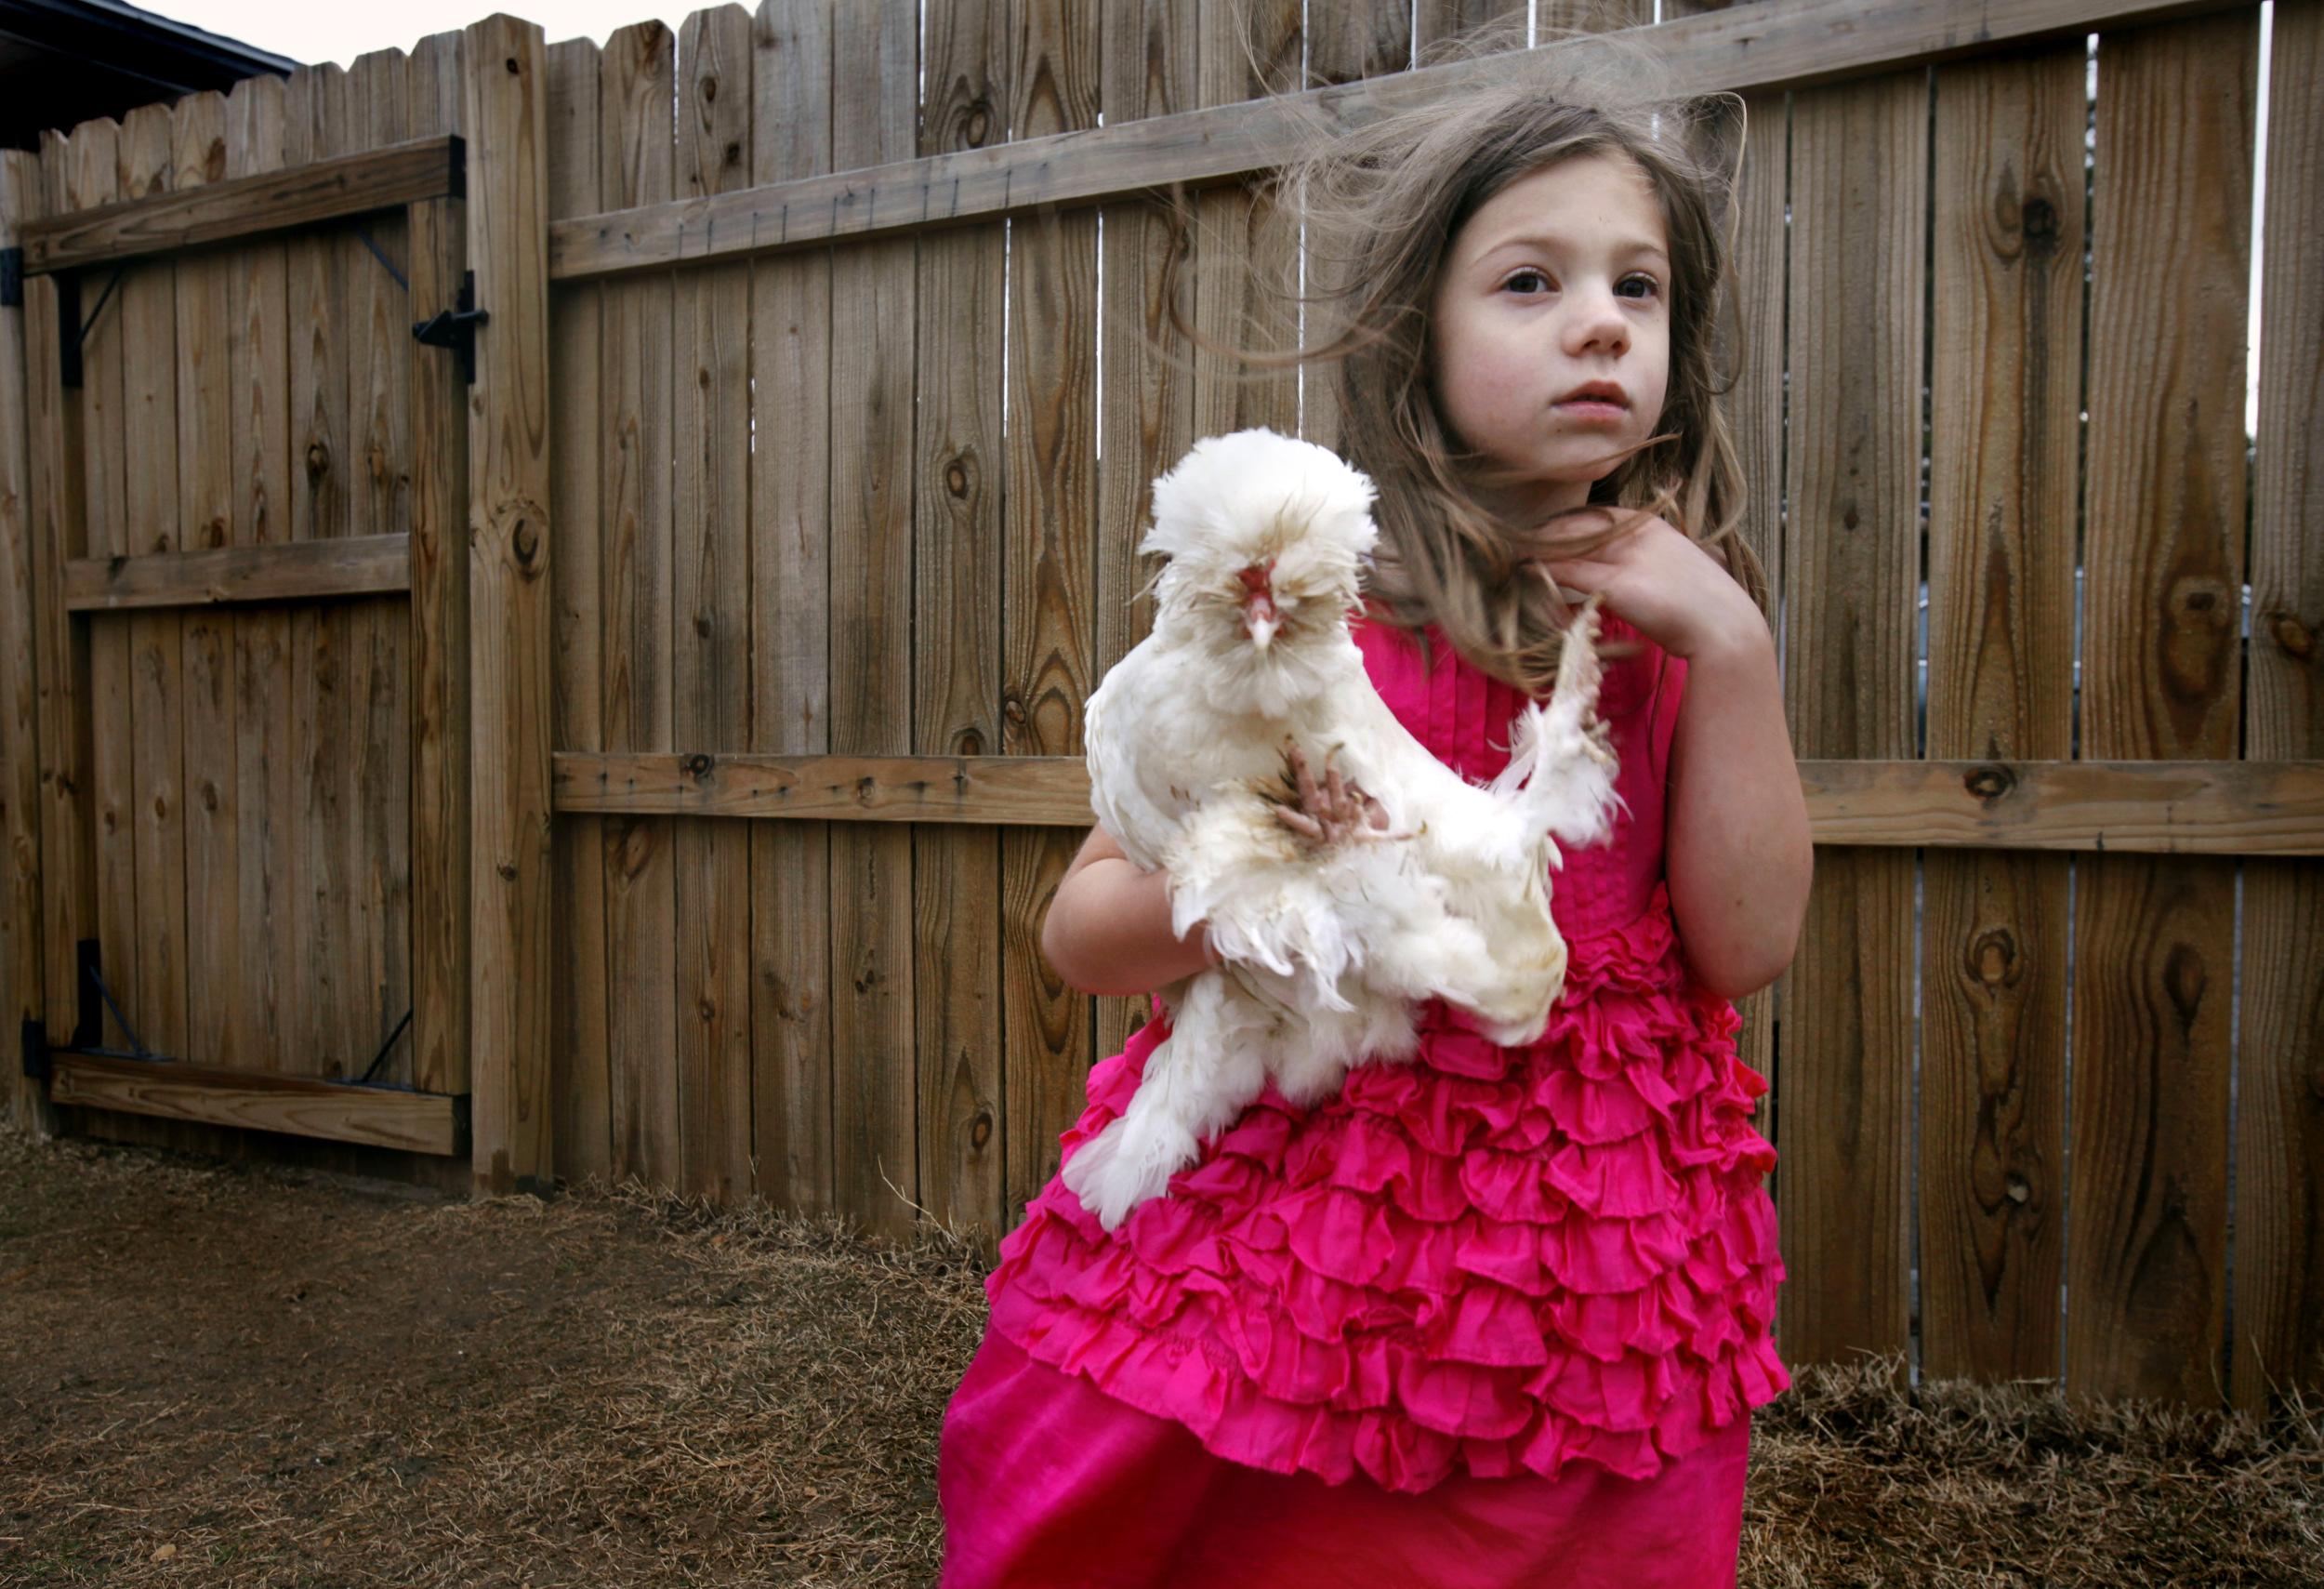  Sera Oakes, 6, holds an ornamental chicken she dubbed Popcorn,  in Nashville, Tenn. The Oakes keep chickens in the backyard of their urban home. 